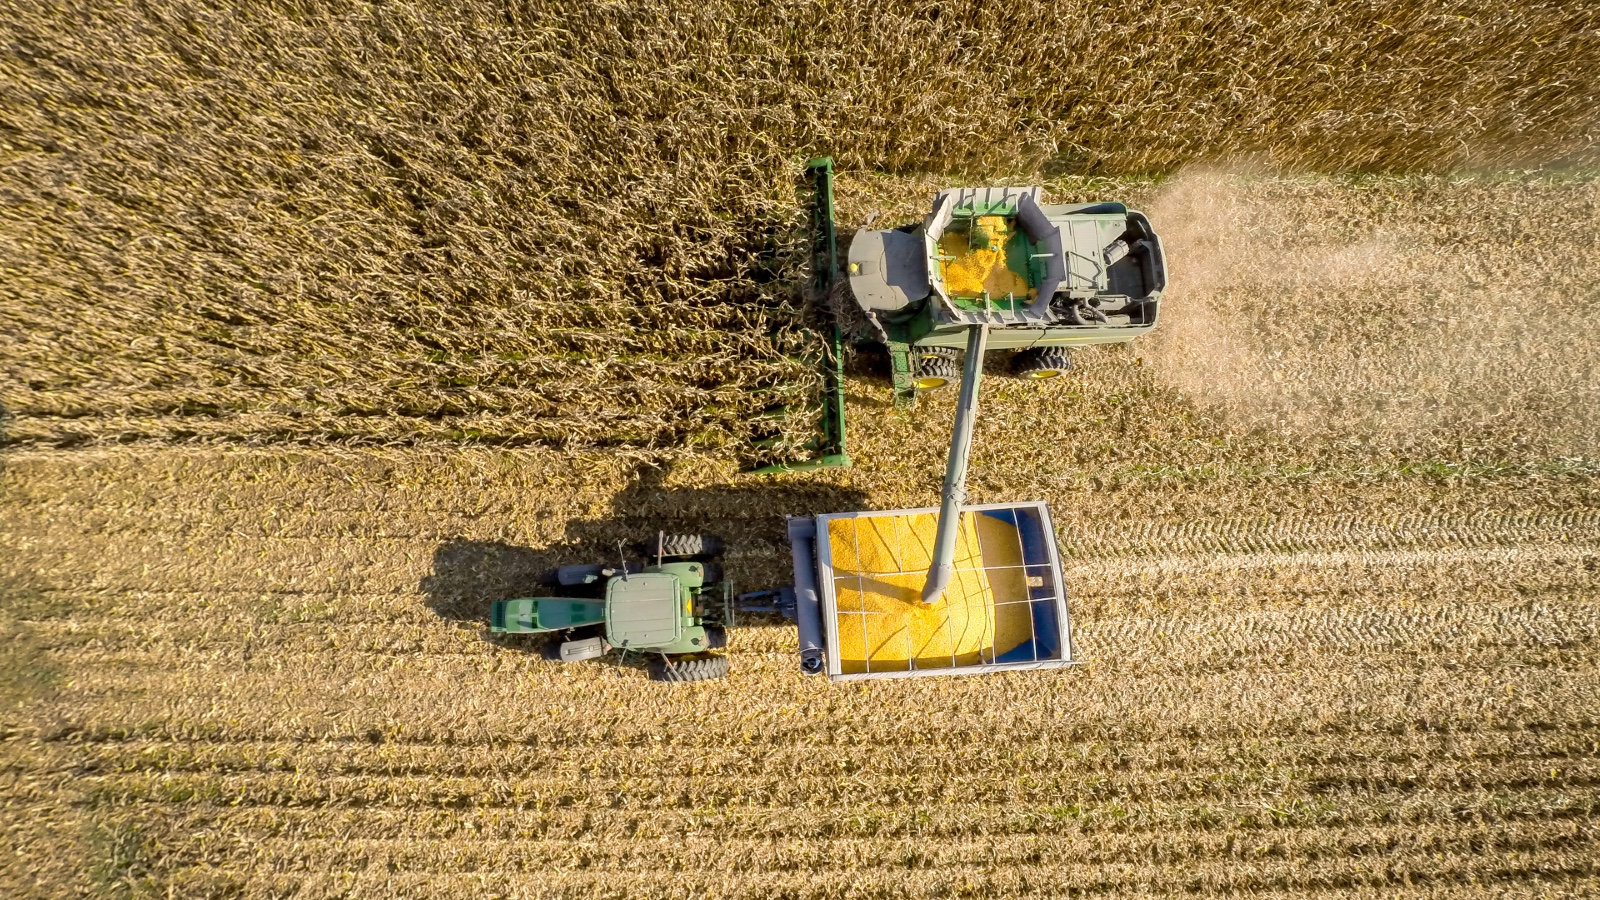 A combine clears a field of corn in Maryland as seen from above